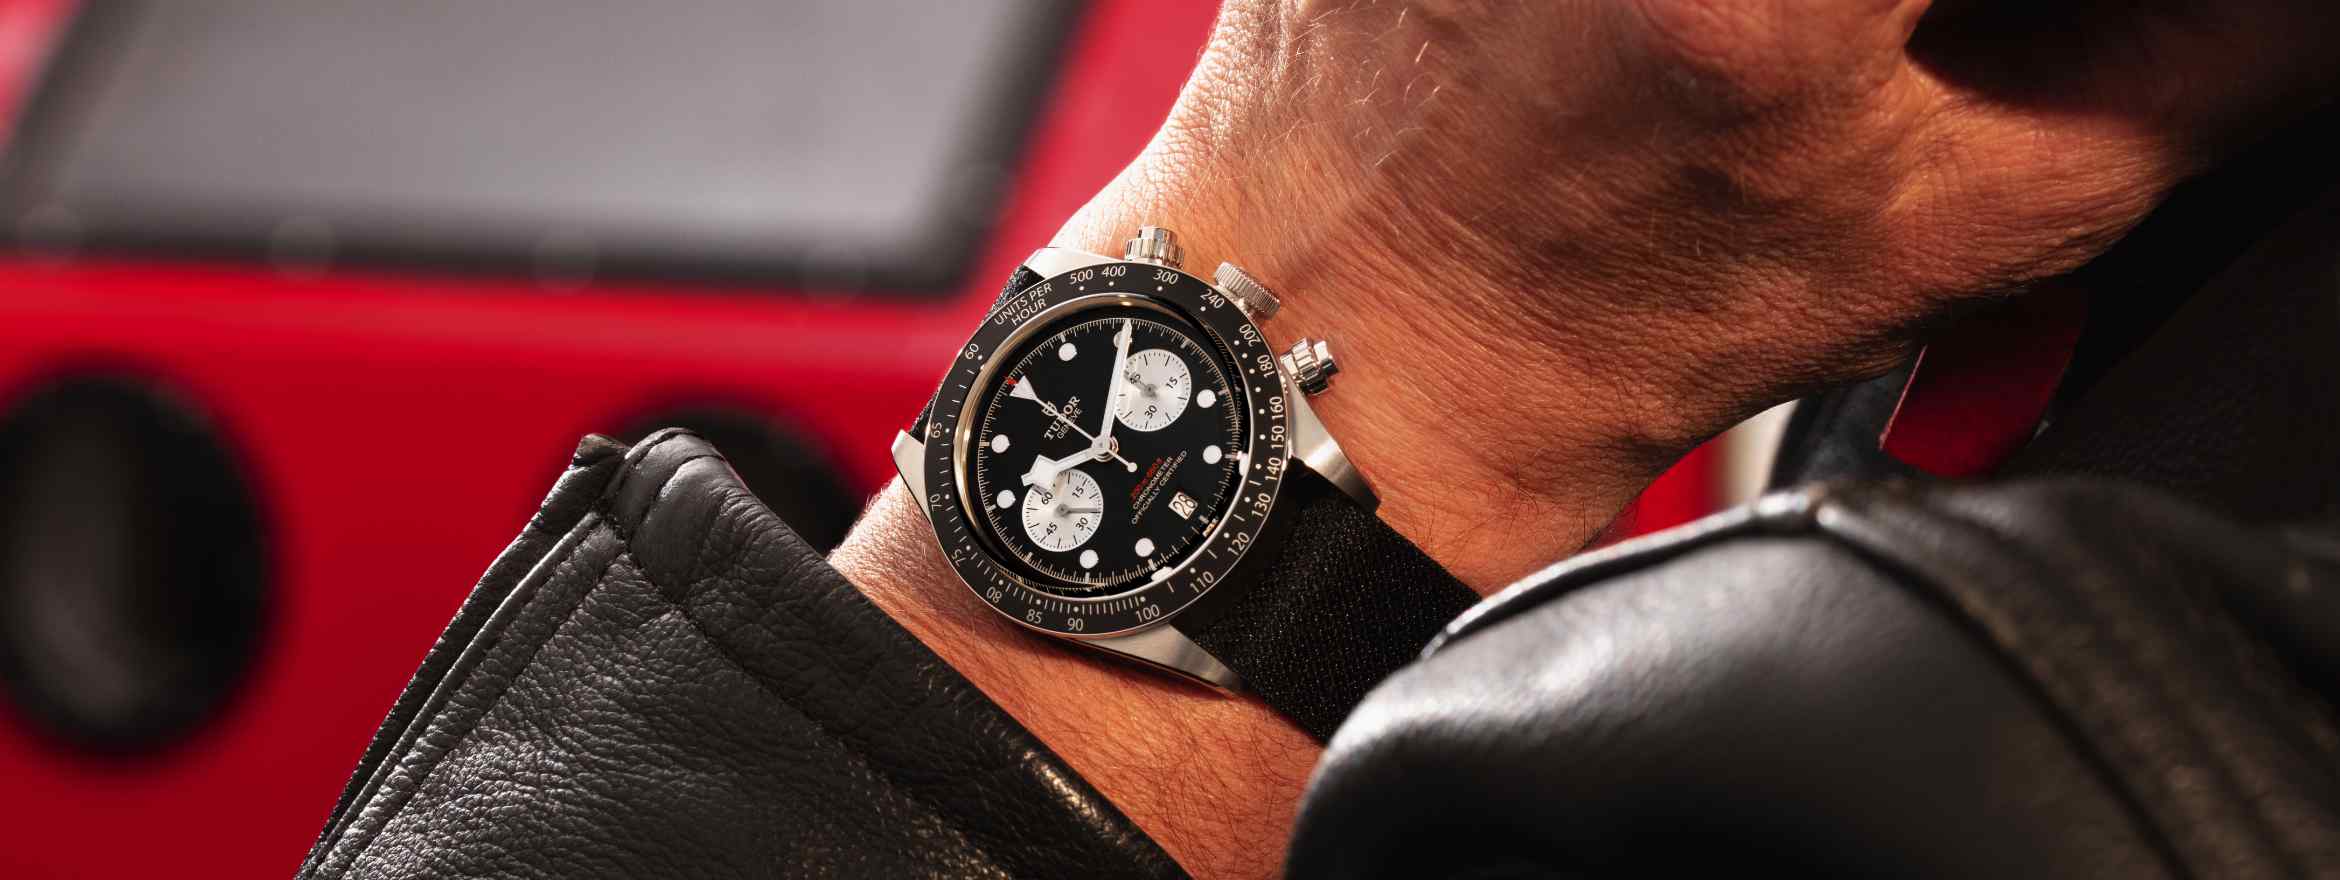 Discover 50 Years of Tudor Chronographs